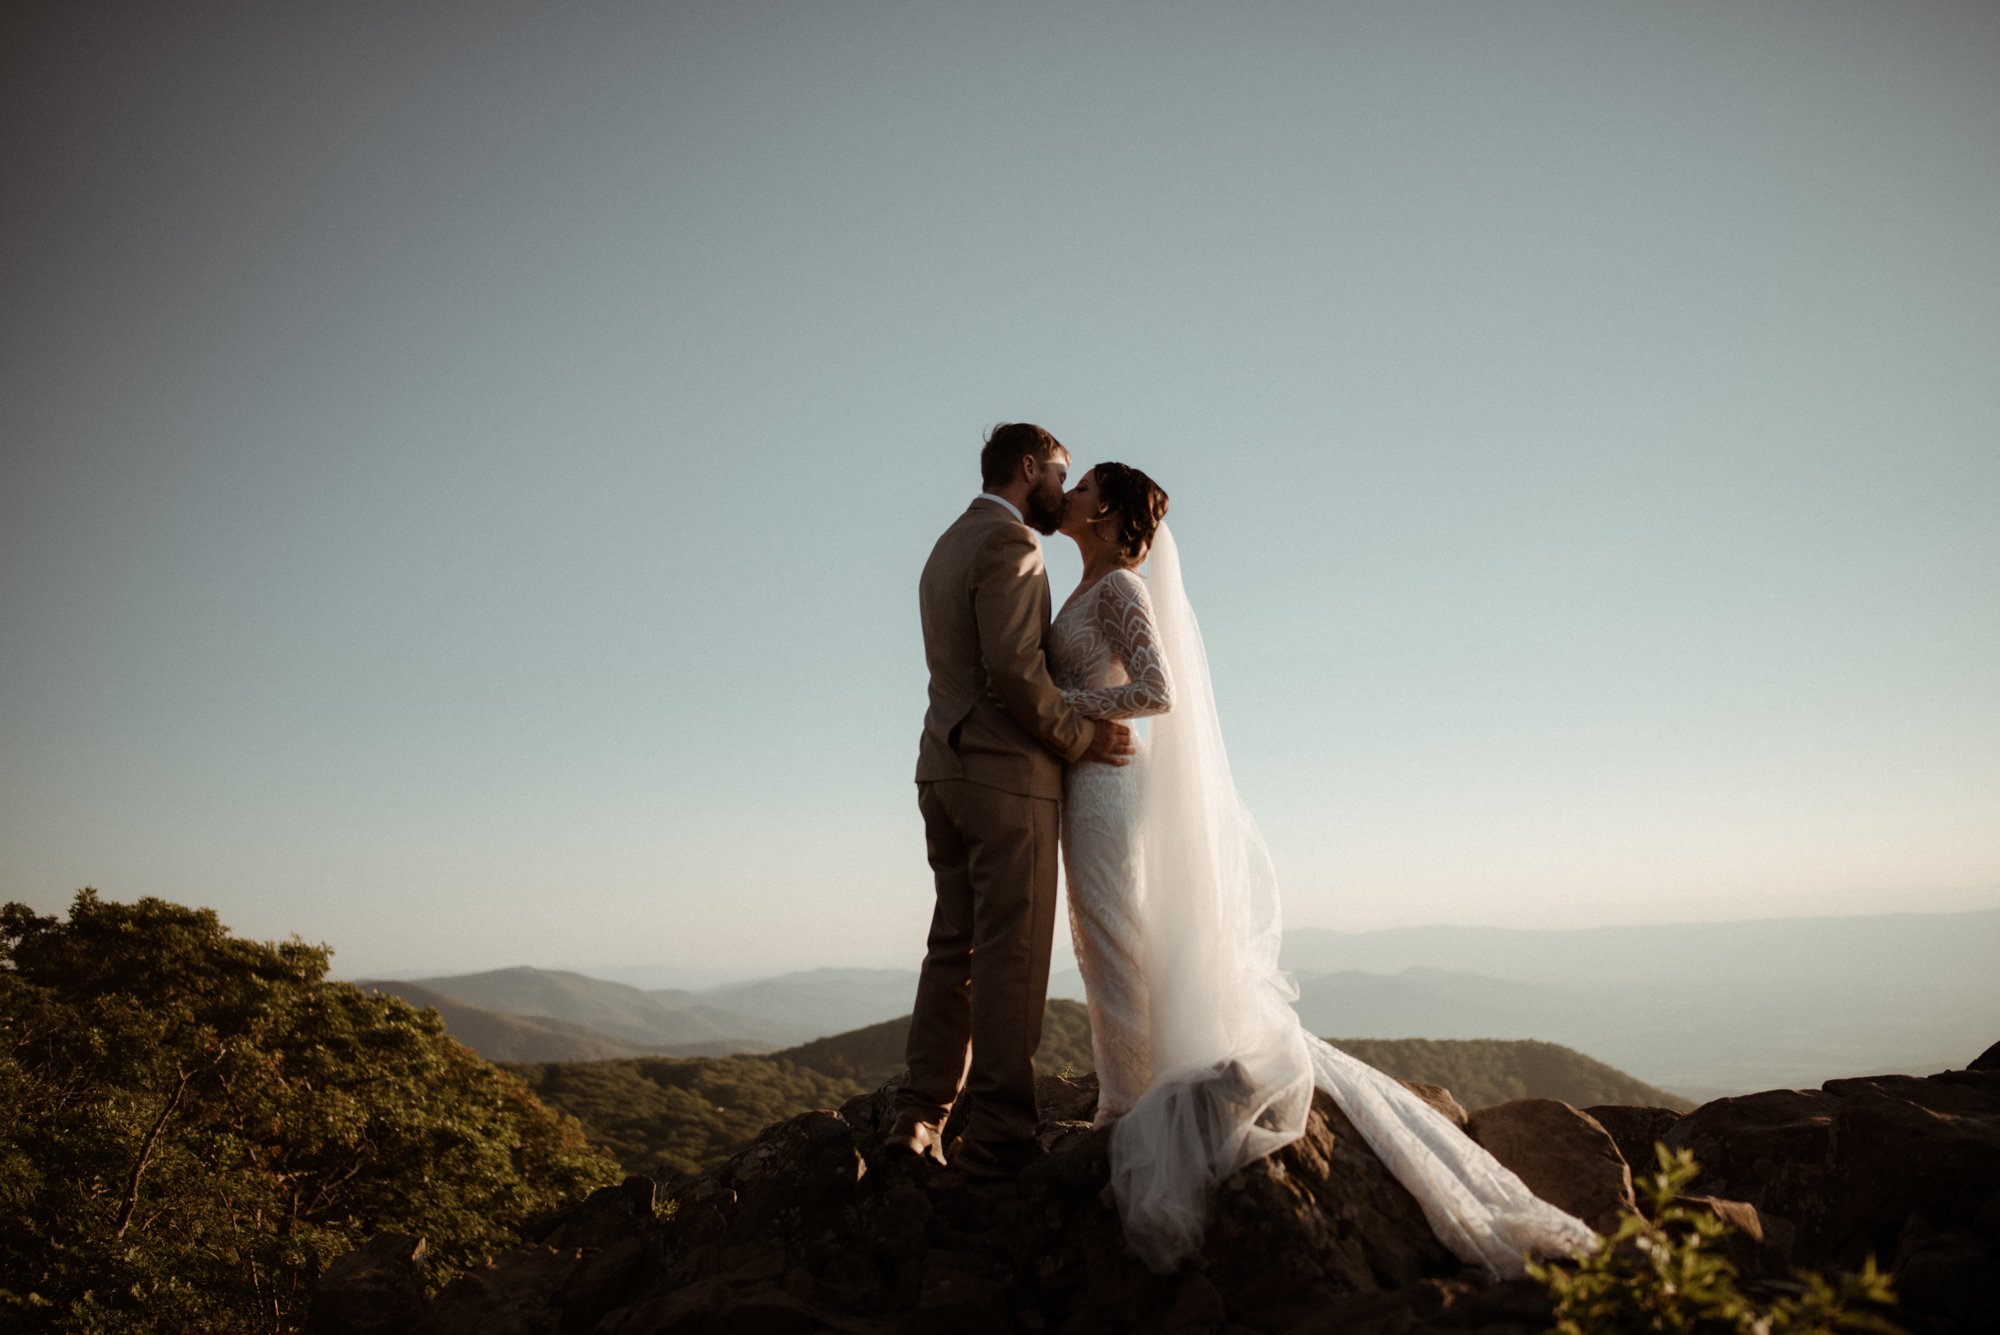 Sunset Elopement on Stony Man Summit in Shenandoah National Park - White Sails Creative Elopement Photography - July Elopement on the Blue Ridge Parkway_59.jpg